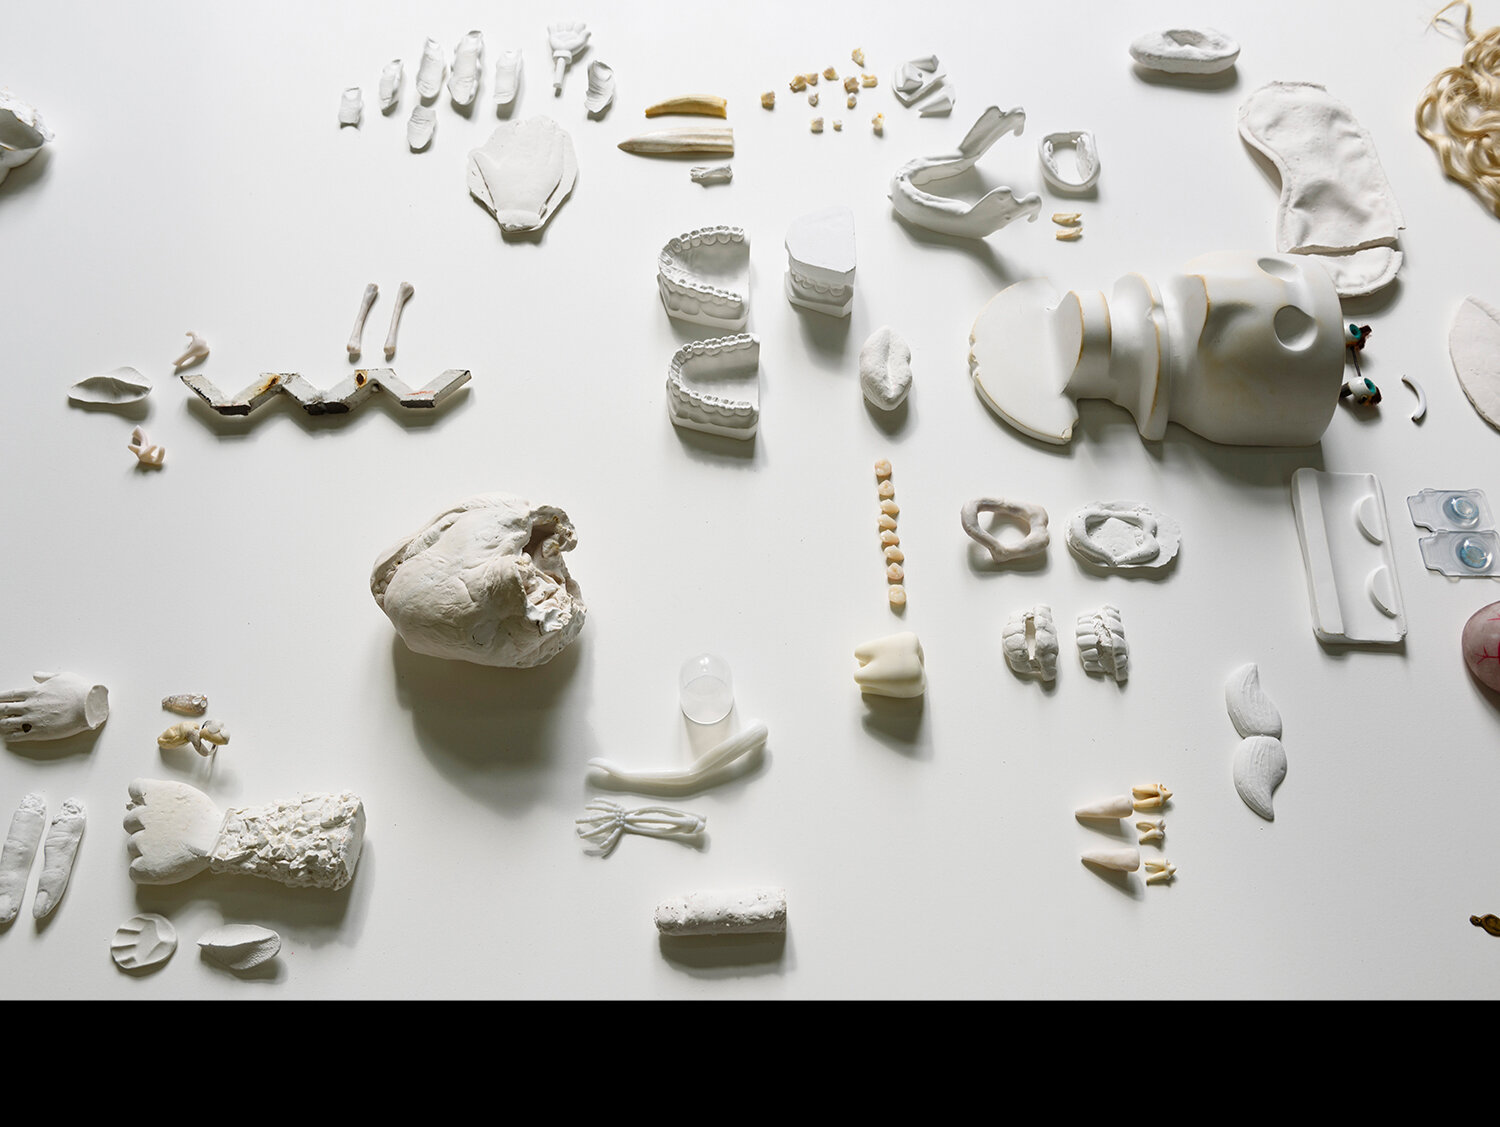   Adam Milner , detail of:  Some Body , 2016, teeth, bones, soap, polymer clay, cast plaster, chewing gum, and found objects–109 parts, 70.5” L x 47” w x varied height. Photo by PJ Rountree. 